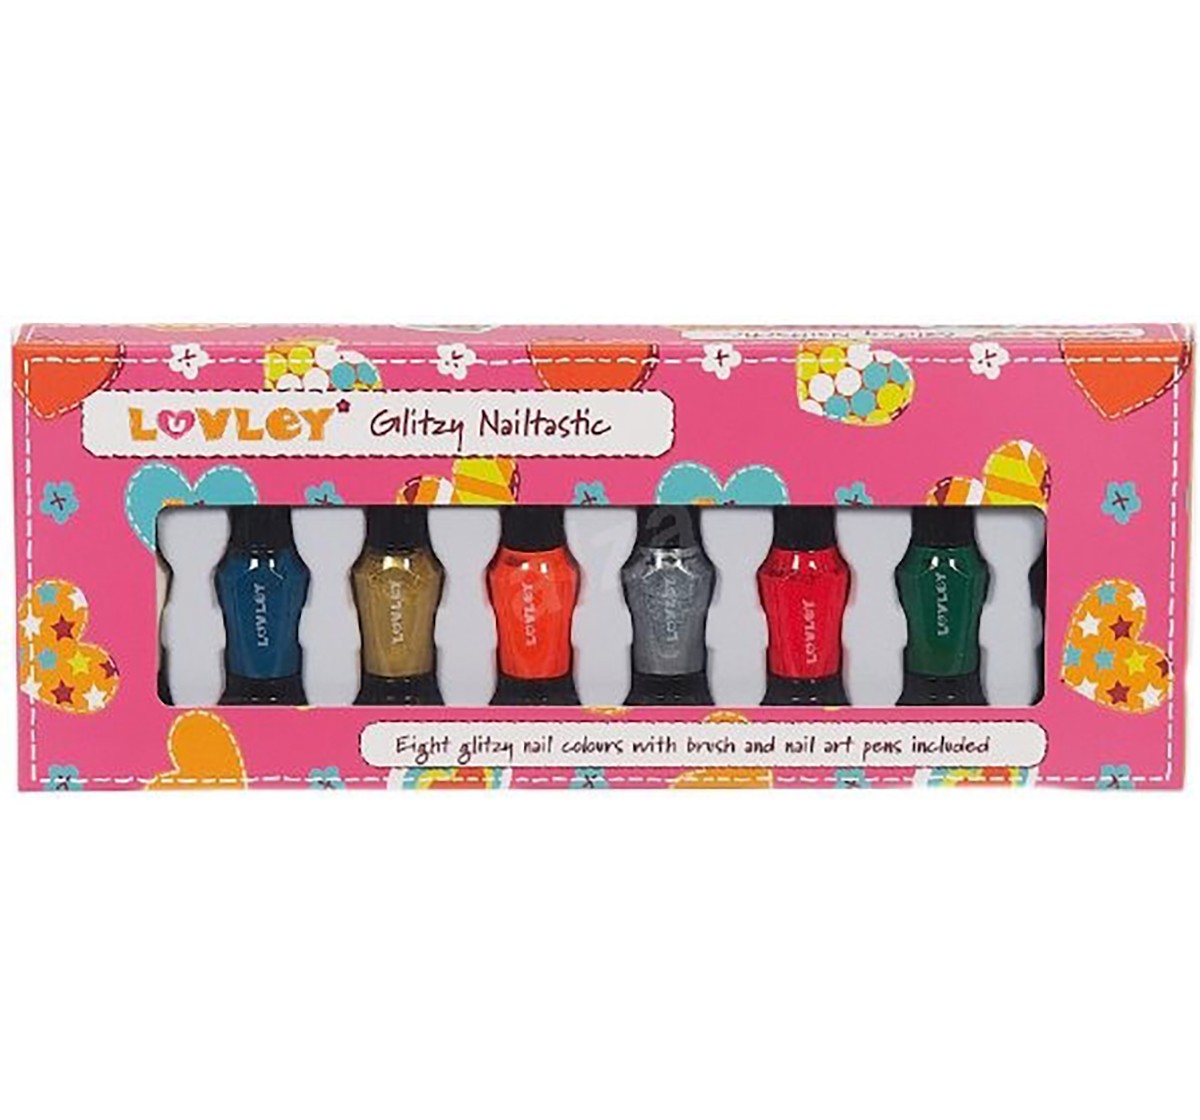 Hamleys Luvley Glitzy Nailtastic Toileteries and Makeup for age 6Y+ 